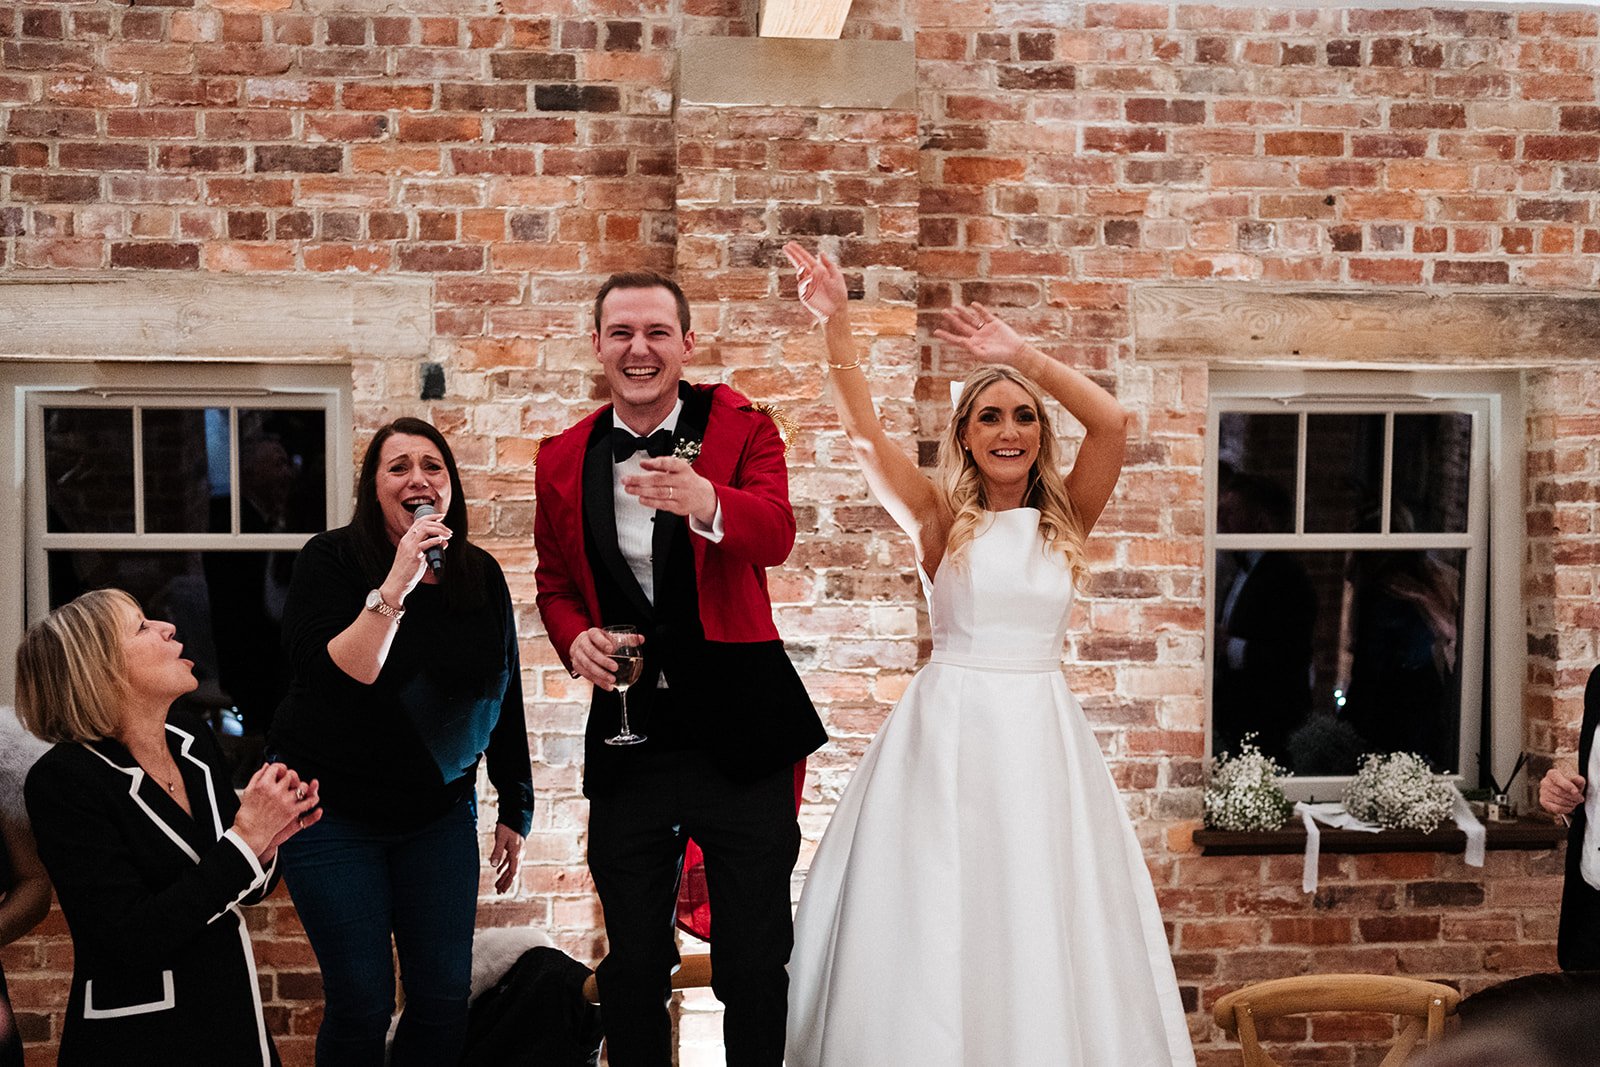 The bride and groom cheer while standing on chairs during their wedding reception mail at Thirsk Lodge Barns